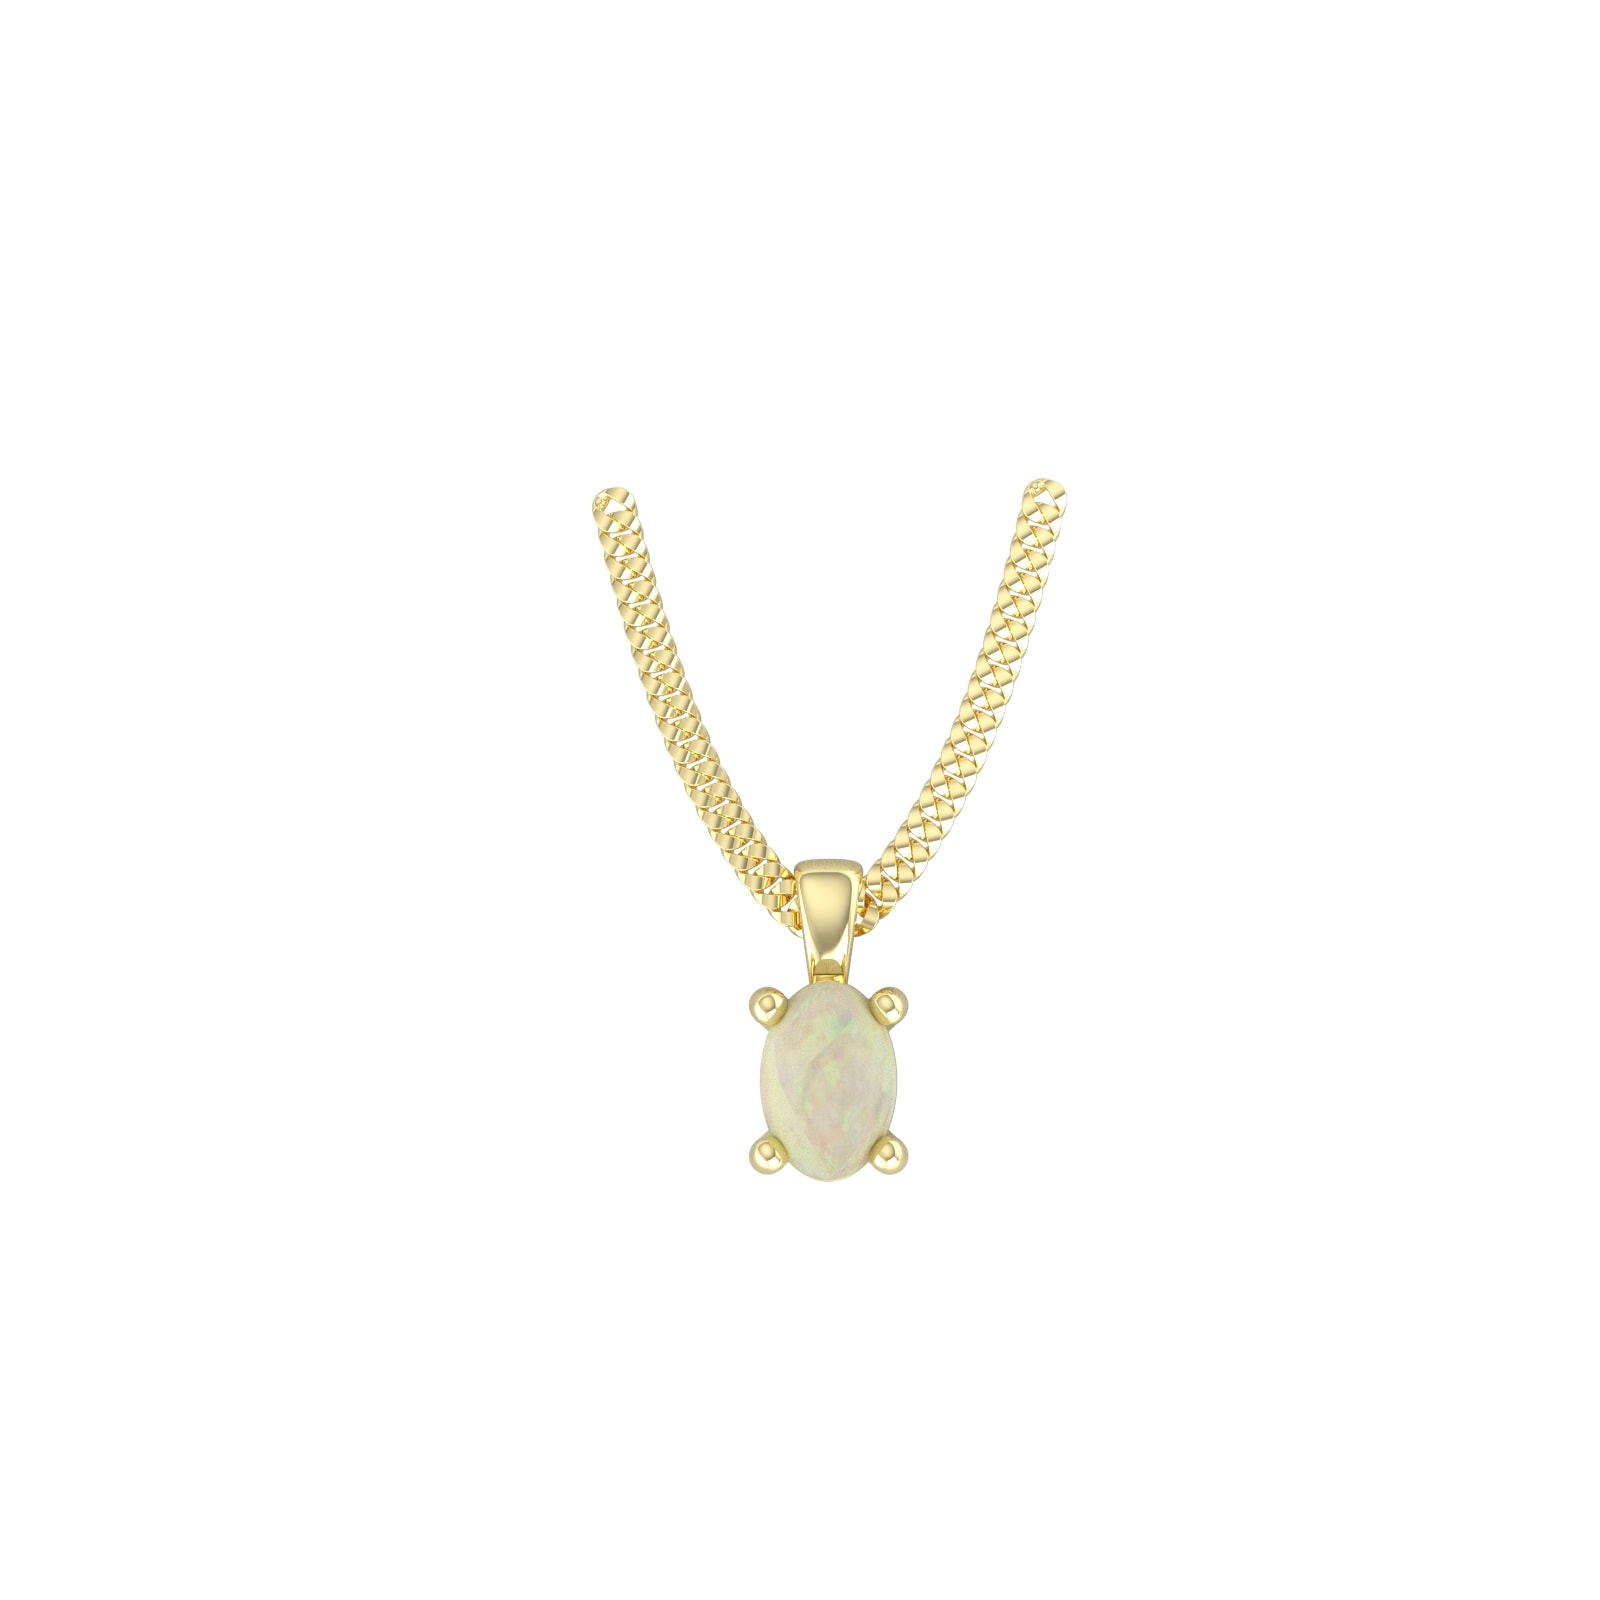 9ct Yellow Gold 4 Claw Oval Cut Opal Pendant & Chain